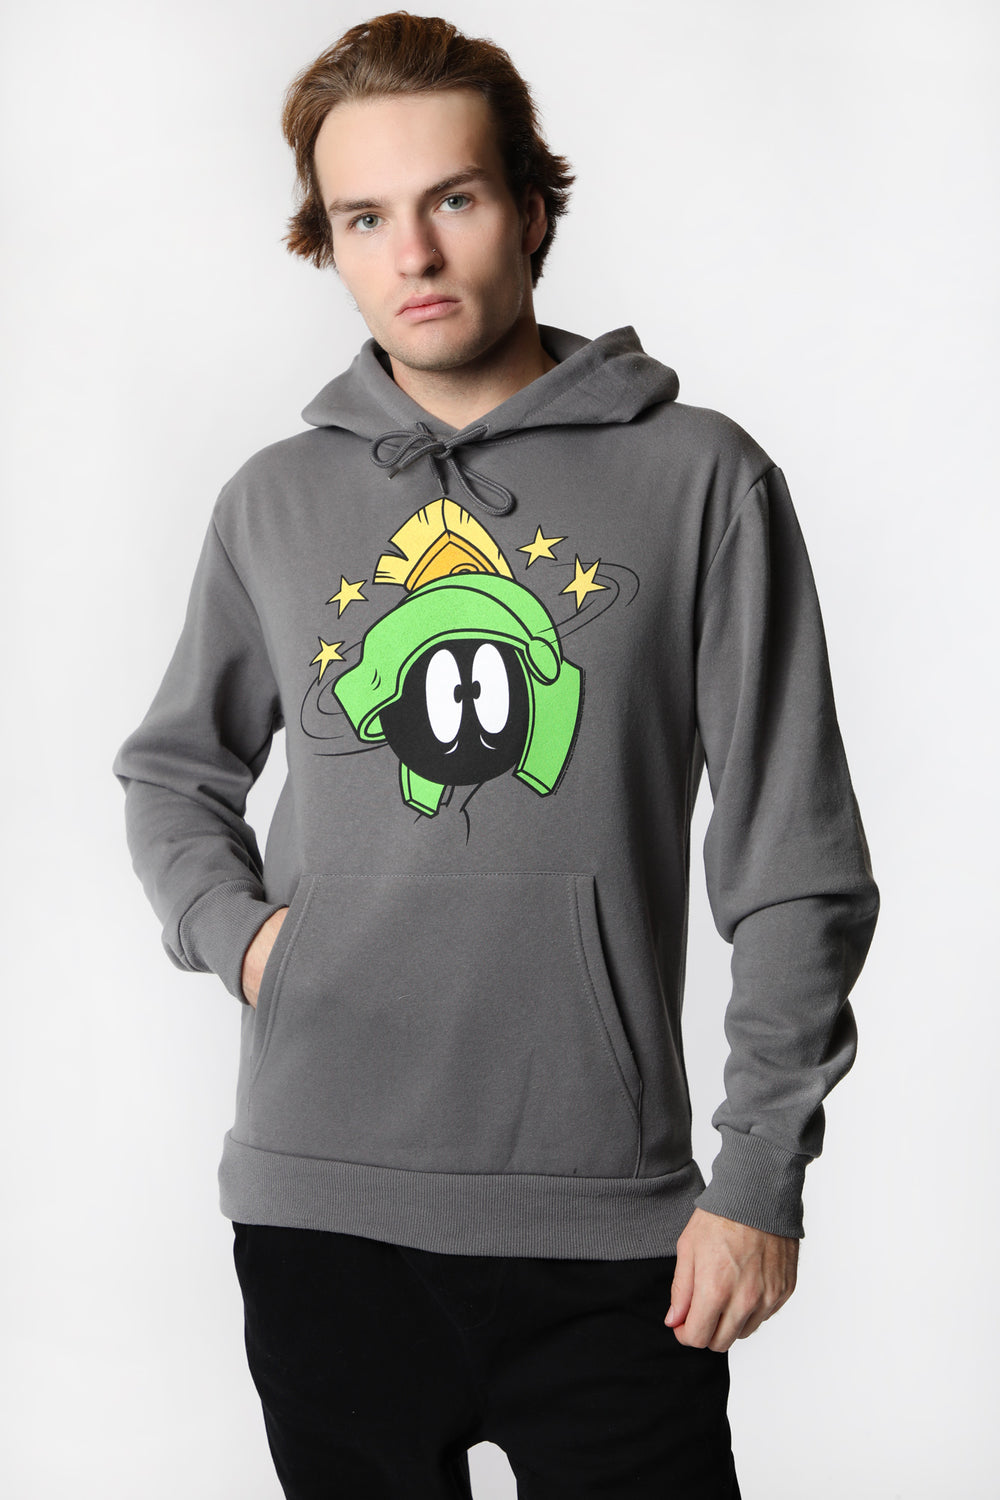 Mens Marvin The Martian Hoodie Mens Marvin The Martian Hoodie